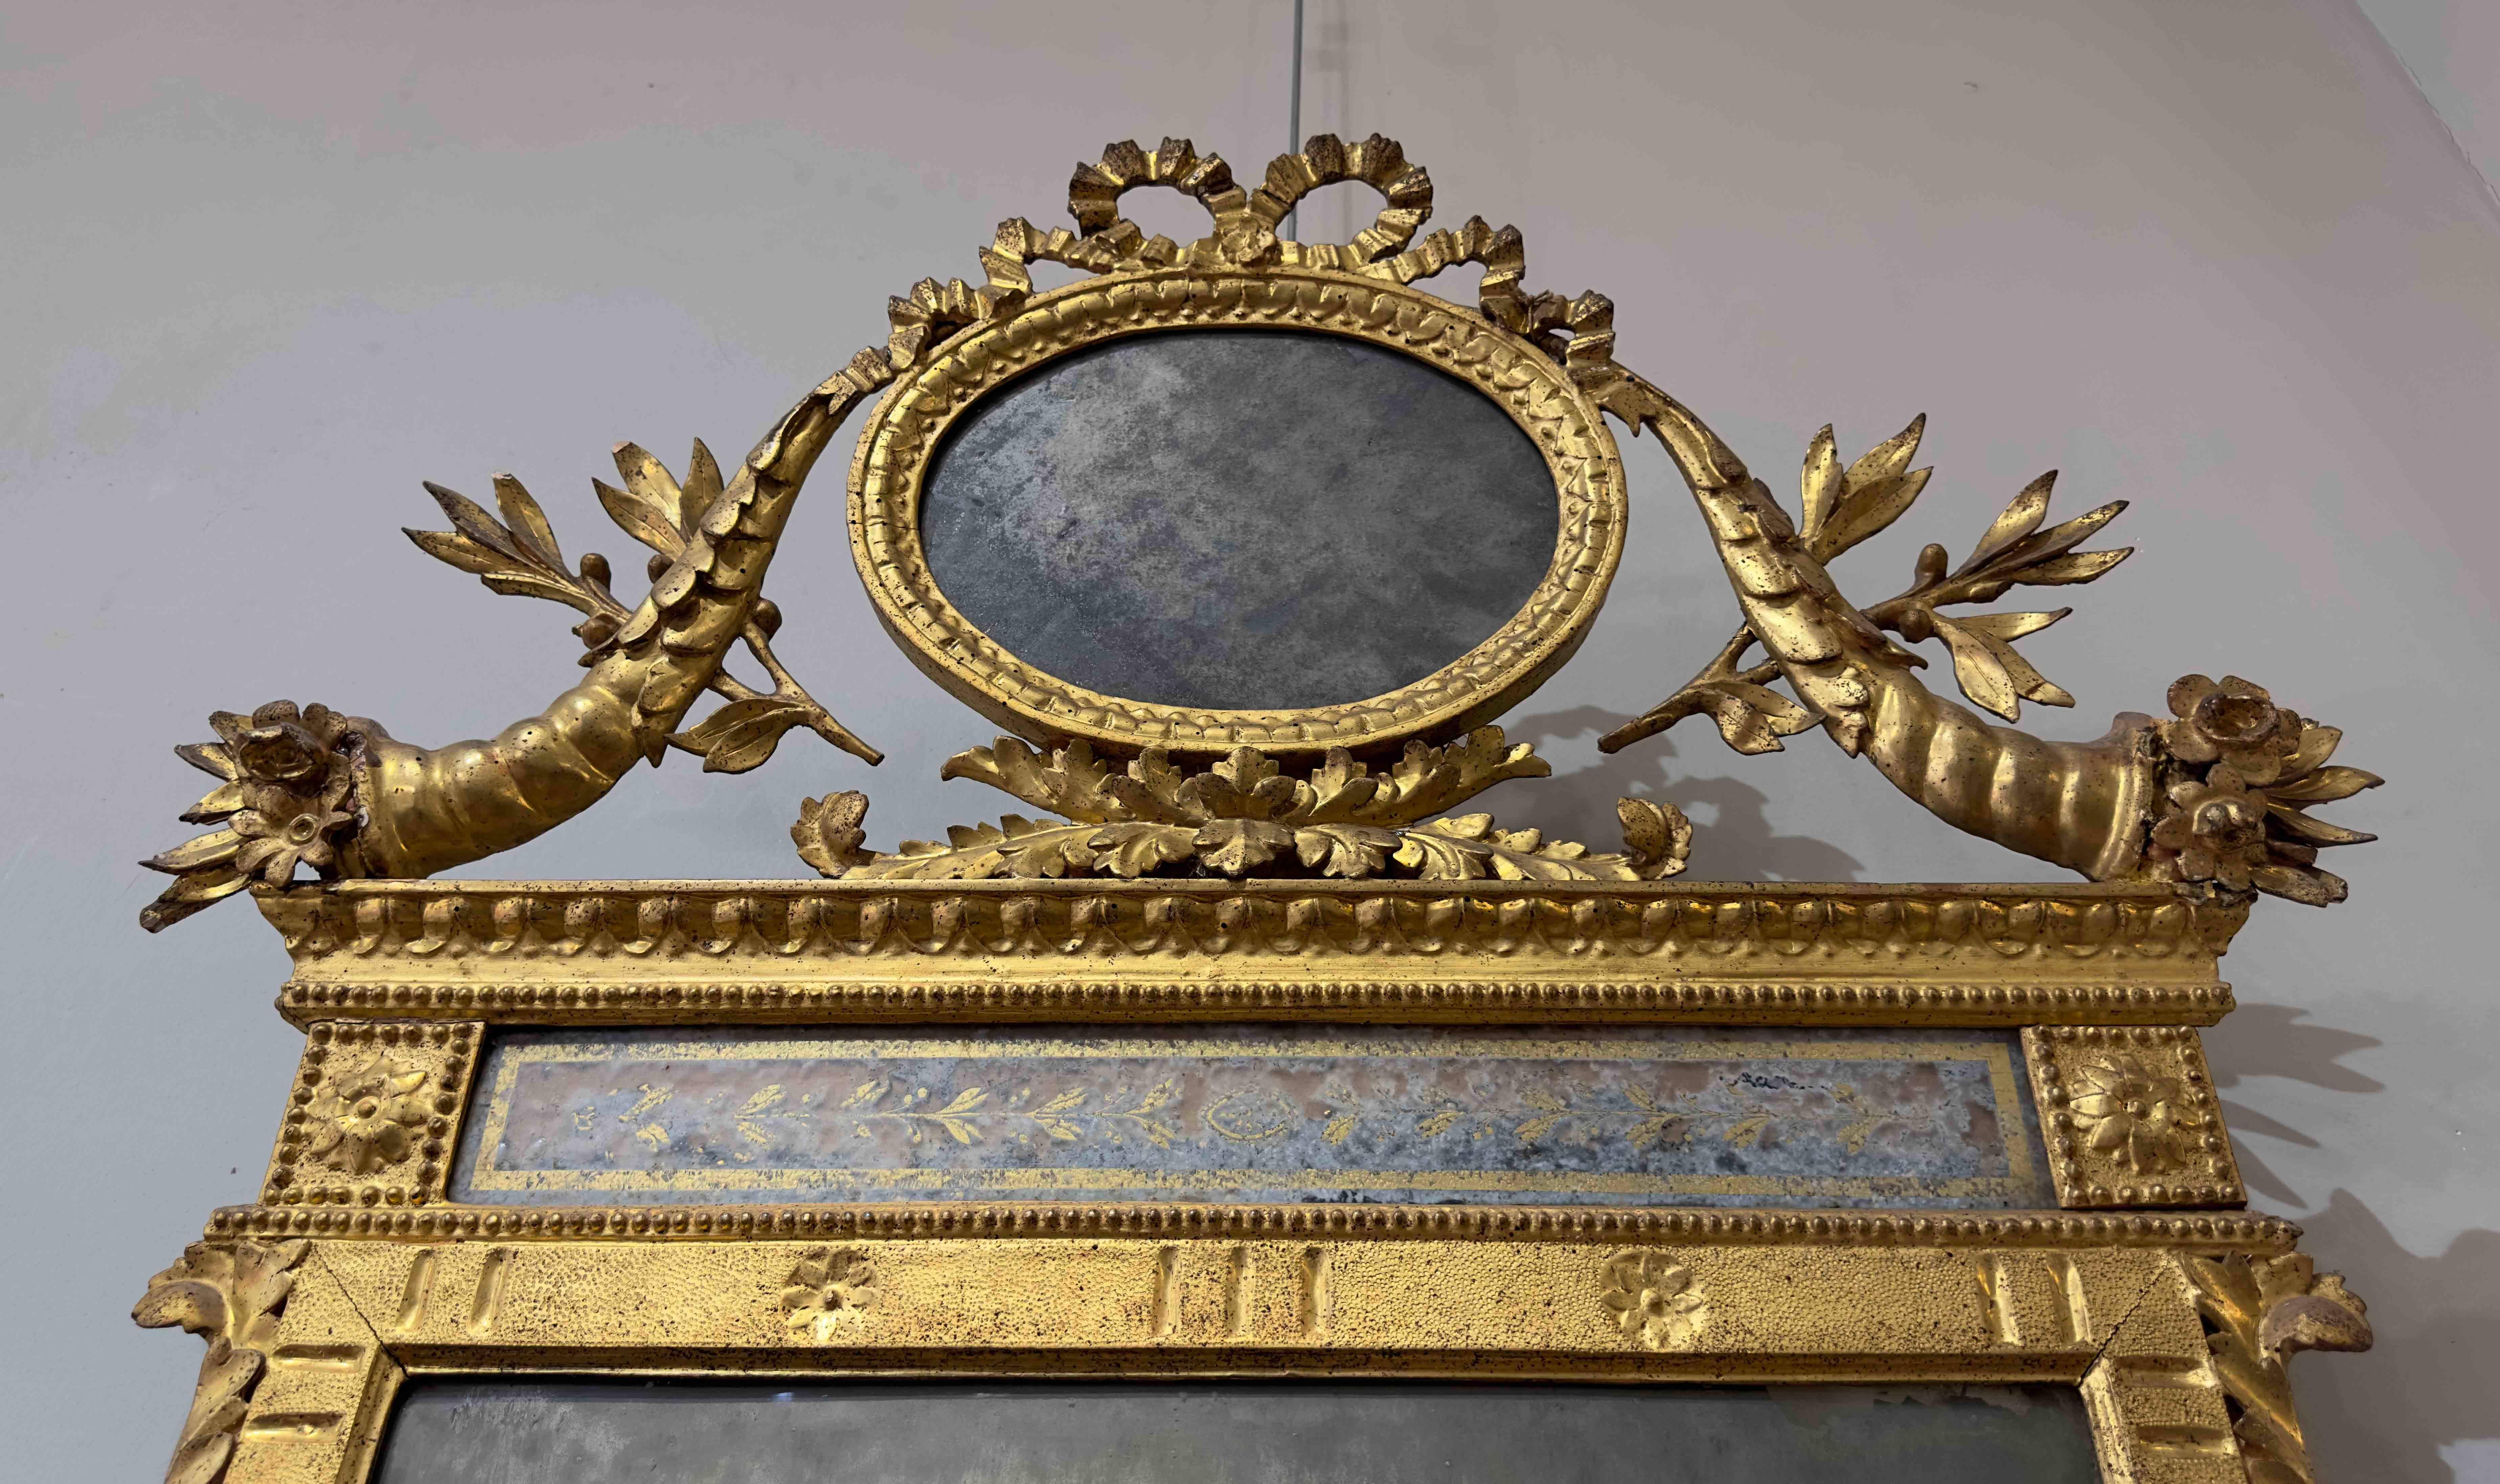 Italian END OF THE 18th CENTURY NEOCLASSICAL MIRROR WITH CORNUCOPIAS AND OLIVE BRANCHES  For Sale